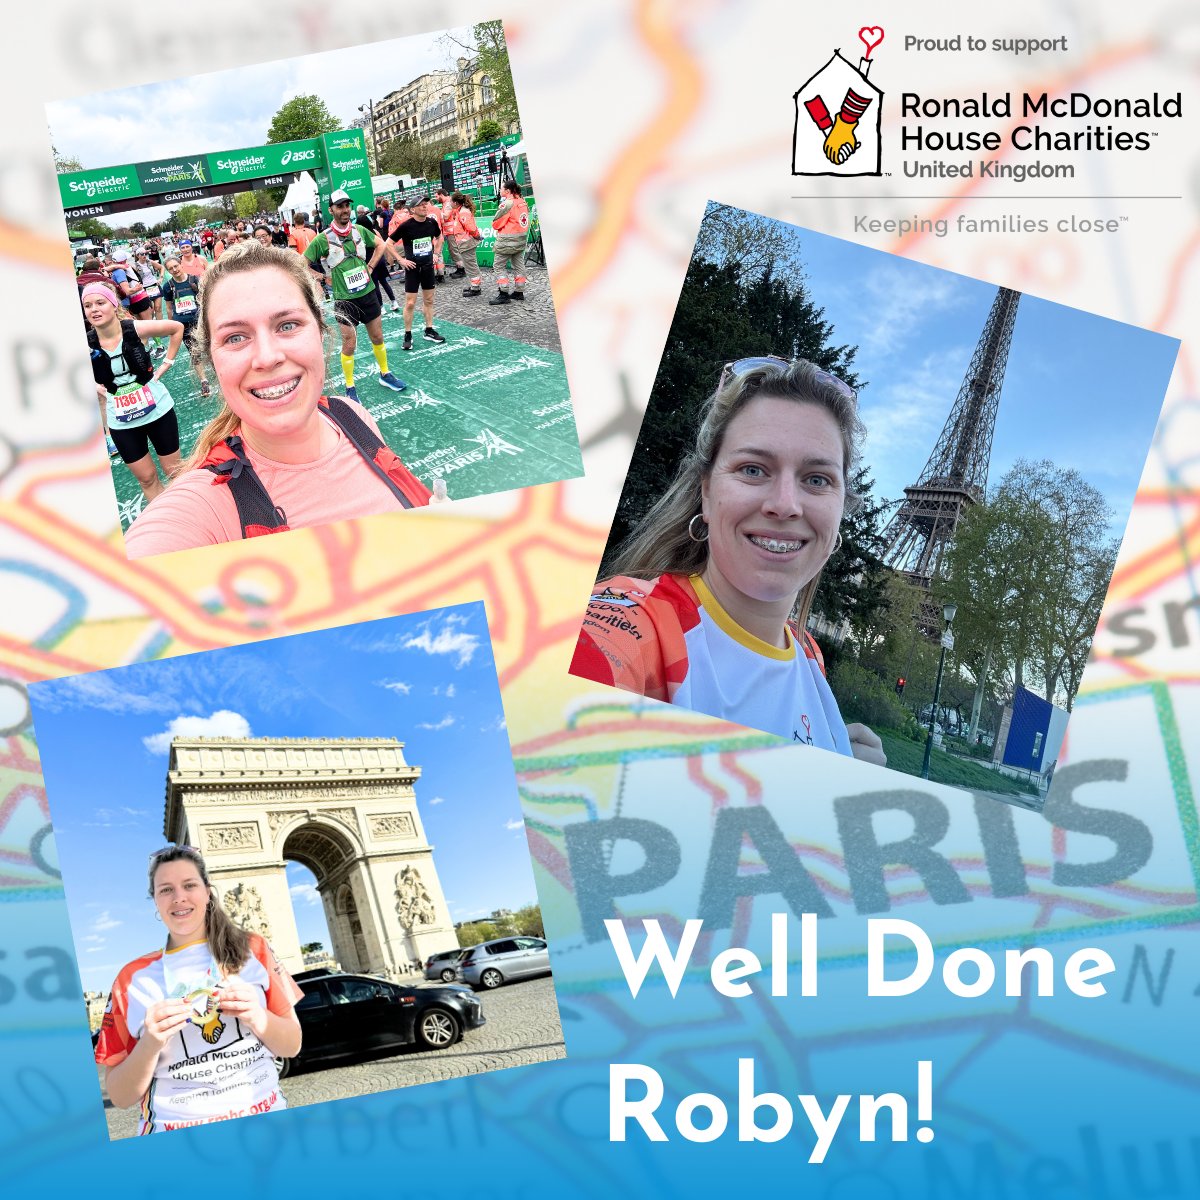 Paris Marathon ✔️

A HUGE well done to Robyn Hulley for completing the #ParisMarathon and supporting Ronald McDonald House Charities! 

She managed to raise a whopping £1,411 for the #charity and we're now 28% of the way to achieving our 5K target. 

justgiving.com/team/Ghosts-fu…